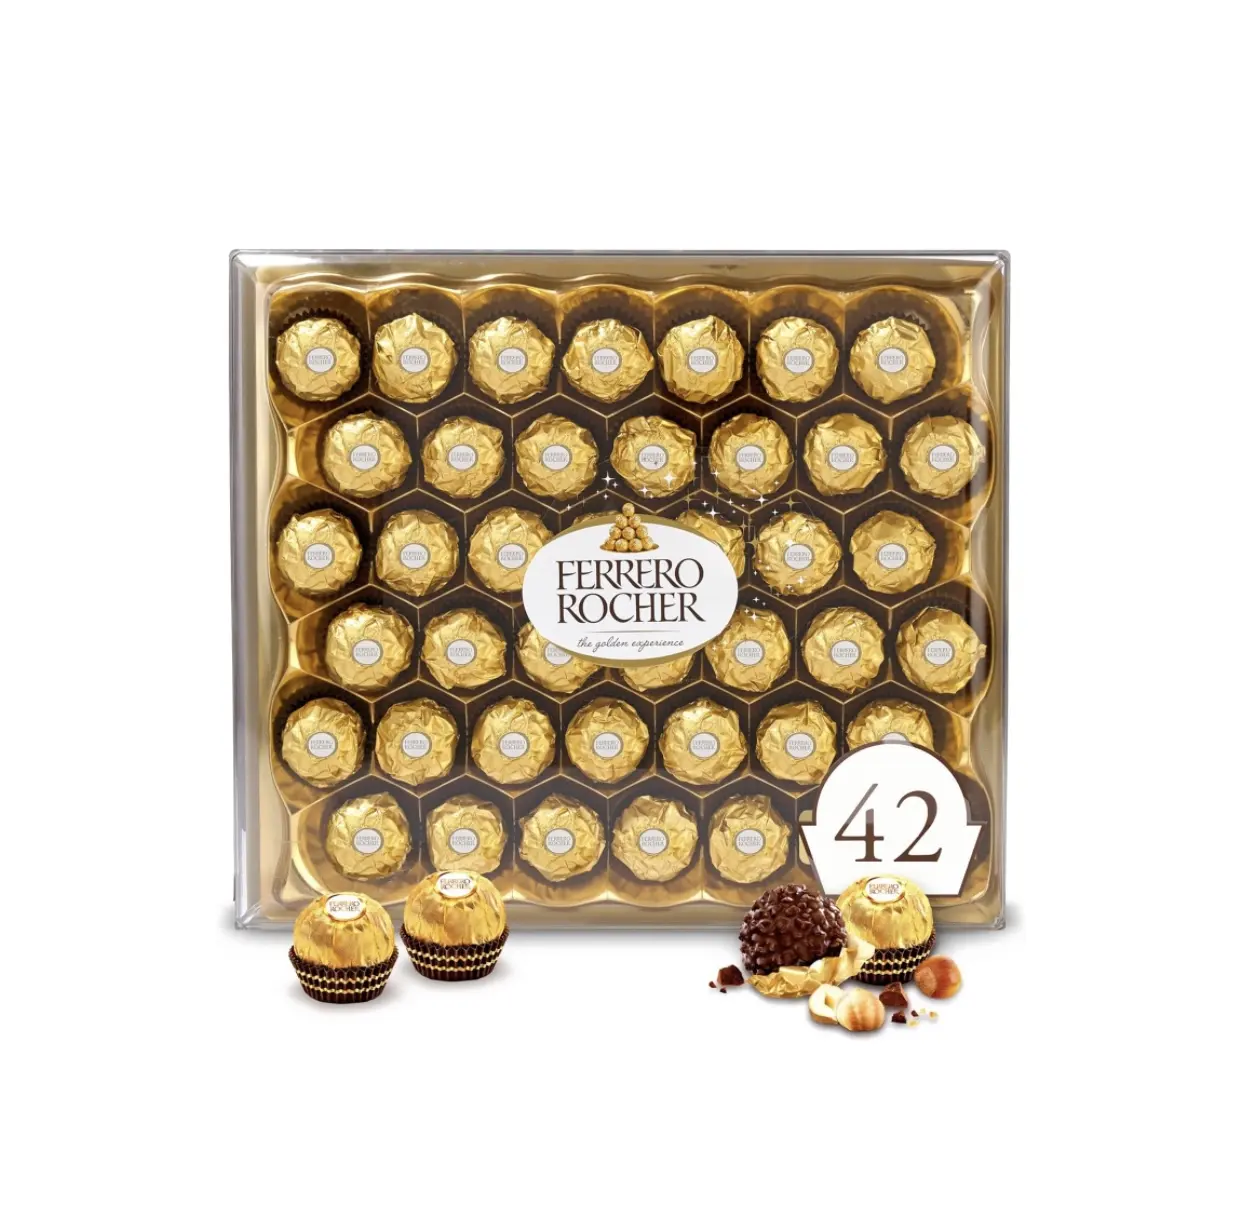 Ferrero Rocher, 42 Count, Premium Gourmet Milk Chocolate Hazelnut Candy , Individually Wrapped Candy for Gifting, 18.5 oz